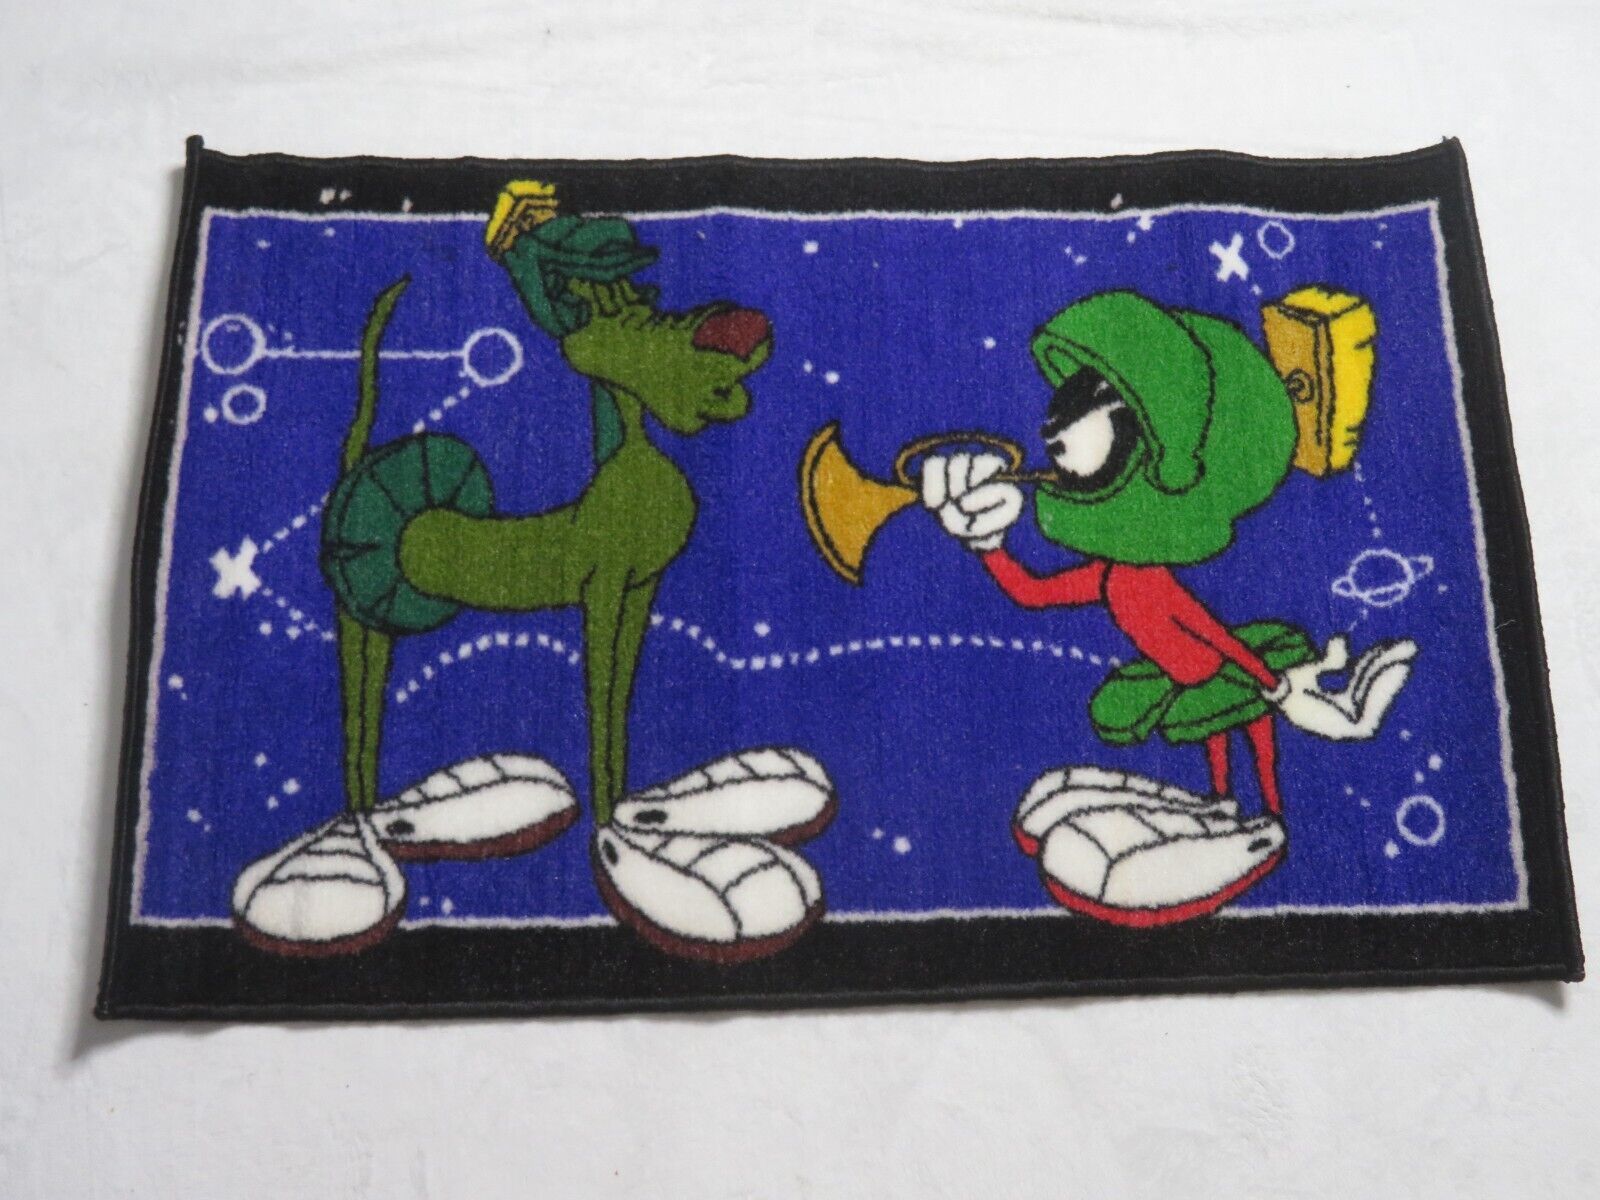 Vintage 1996 Marvin The Martian Looney Tunes Rug 22x35 Inches Pre Owned 90s Rare